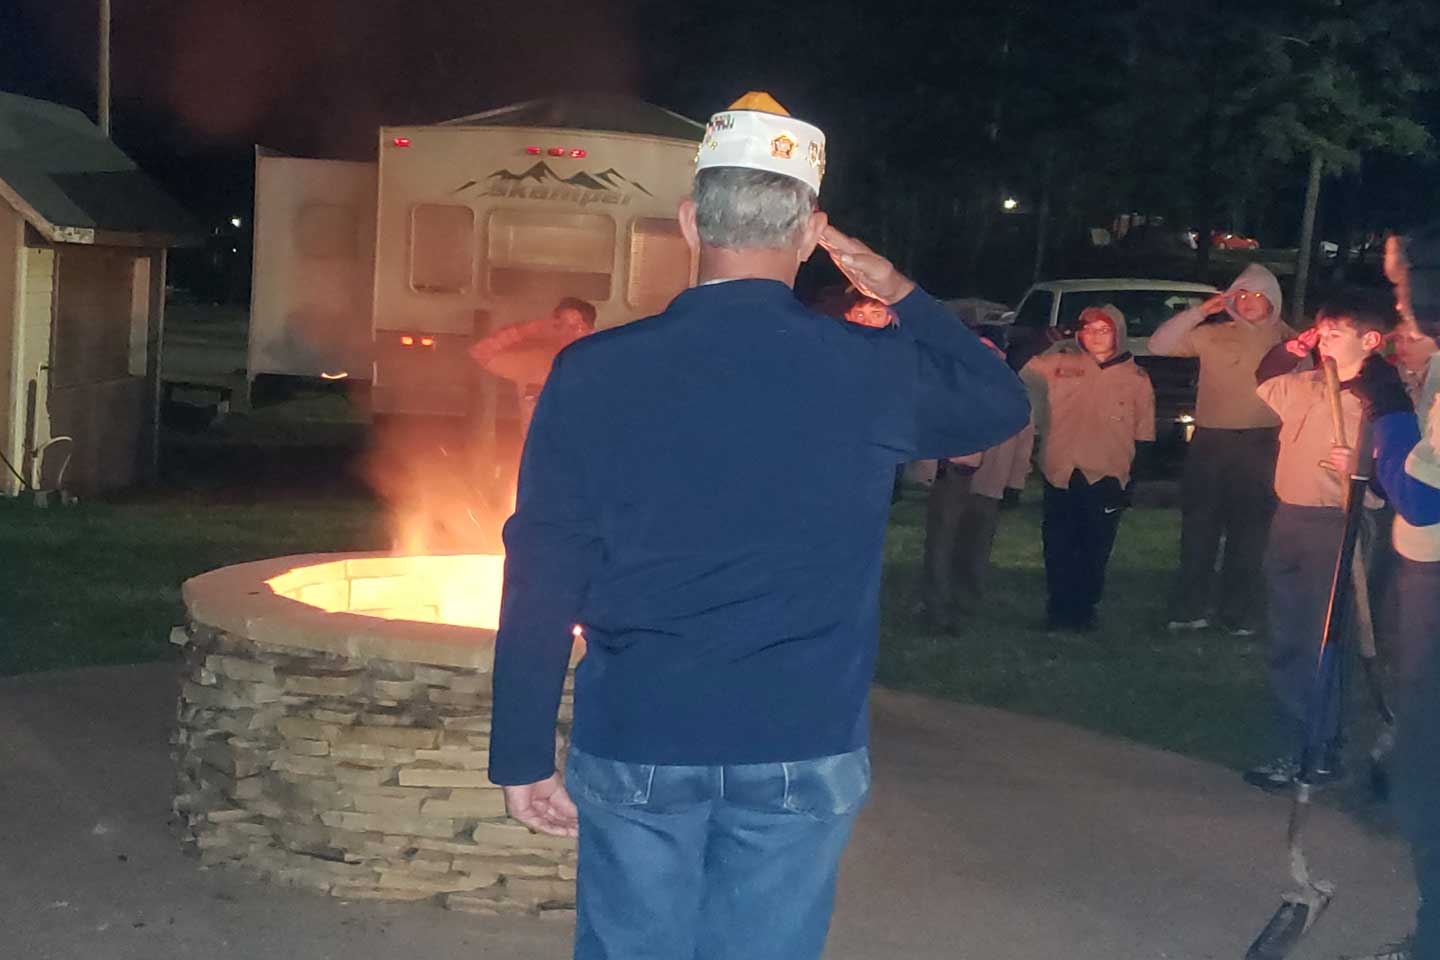 On Thursday March 14, 2019, Officers, and Auxiliary Members of Veterans of Foreign Wars Post 7402 were joined by members of Boy Scout Troop 353 {Powder Springs. GA.} and Troop 23{Rockmart, GA.} ceremoniously retiring 75 United States of American flags.